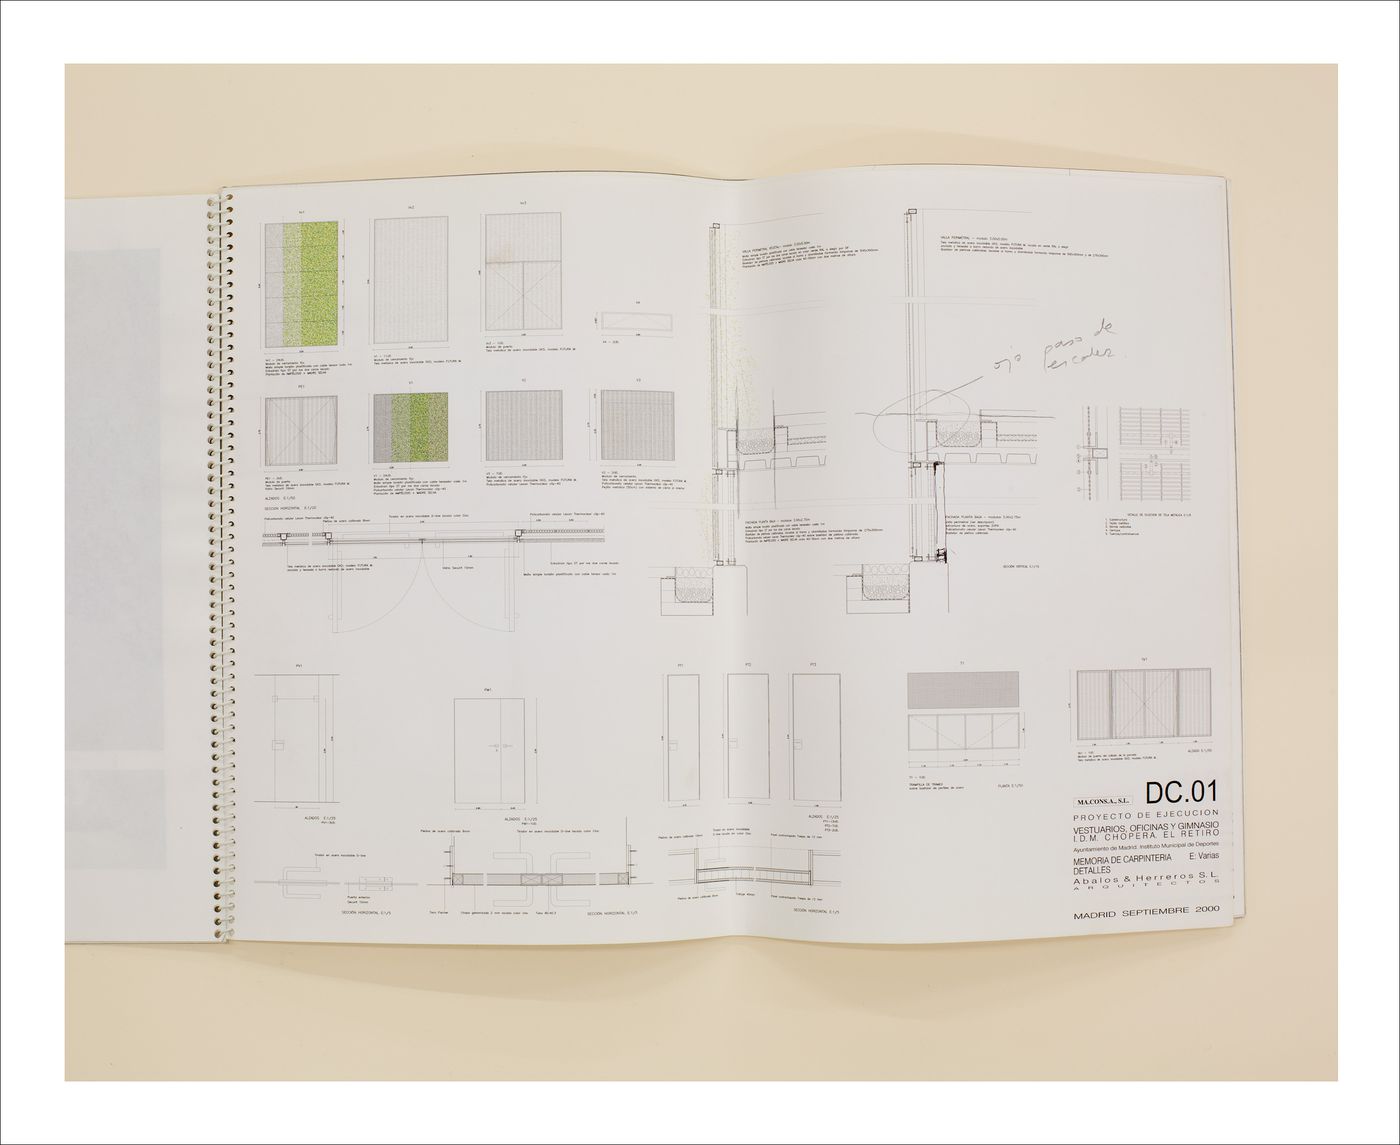 Proofs of Relevance: View of  technical drawings in a spiral-bound book showing the Retiro Park Gymnasium, Abalos & Herreros (1993-2003), Madrid, Spain